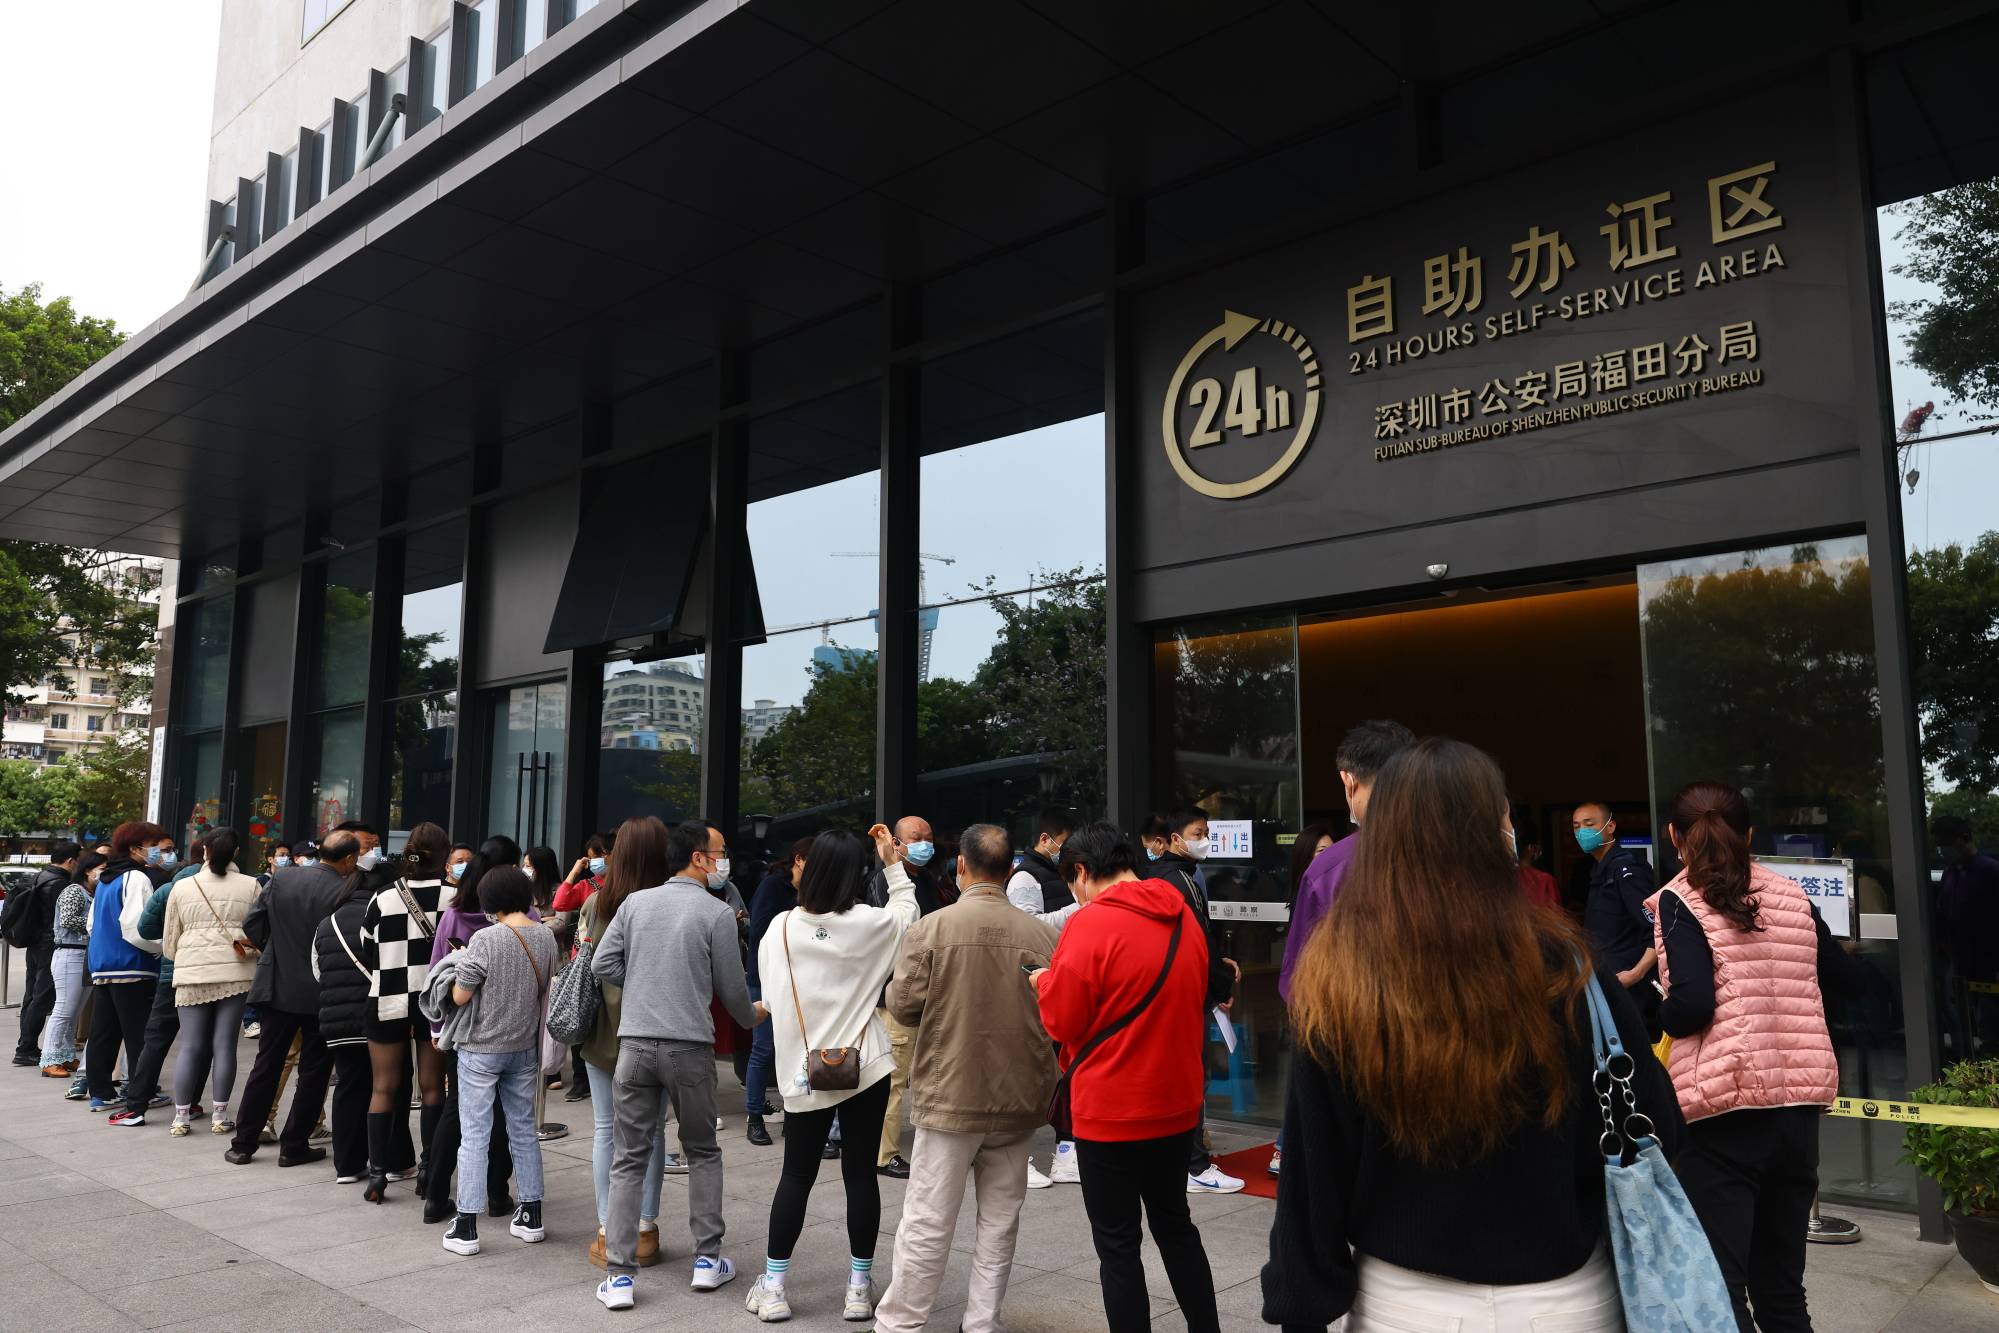 Queues formed at the Shenzhen Public Security Bureau’s Futian branch for mainland tourists to renew entry visas. Photo: Dickson Lee